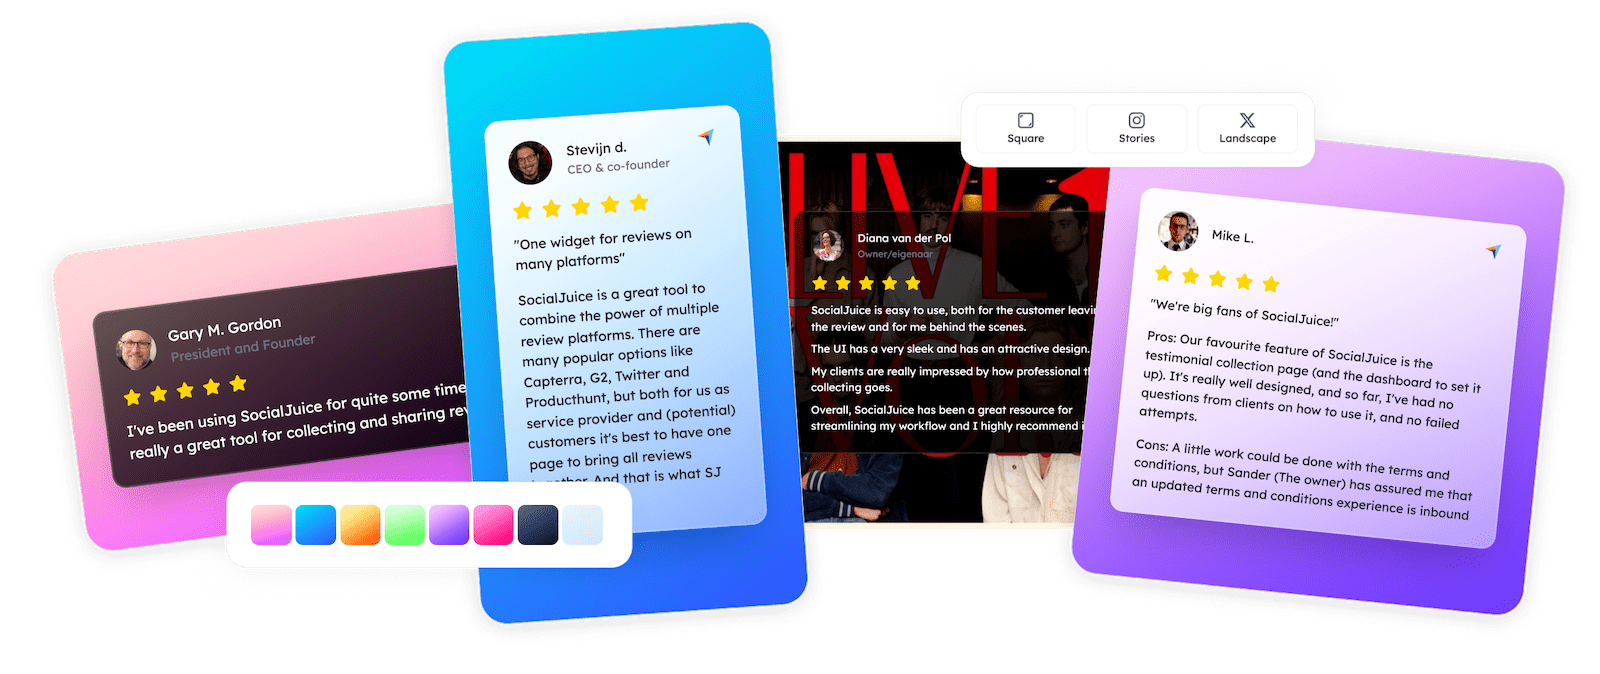 Socialjuice Designer - Create stunning review images for social media. Share your customer feedback on Instagram, Facebook, Twitter, and more.